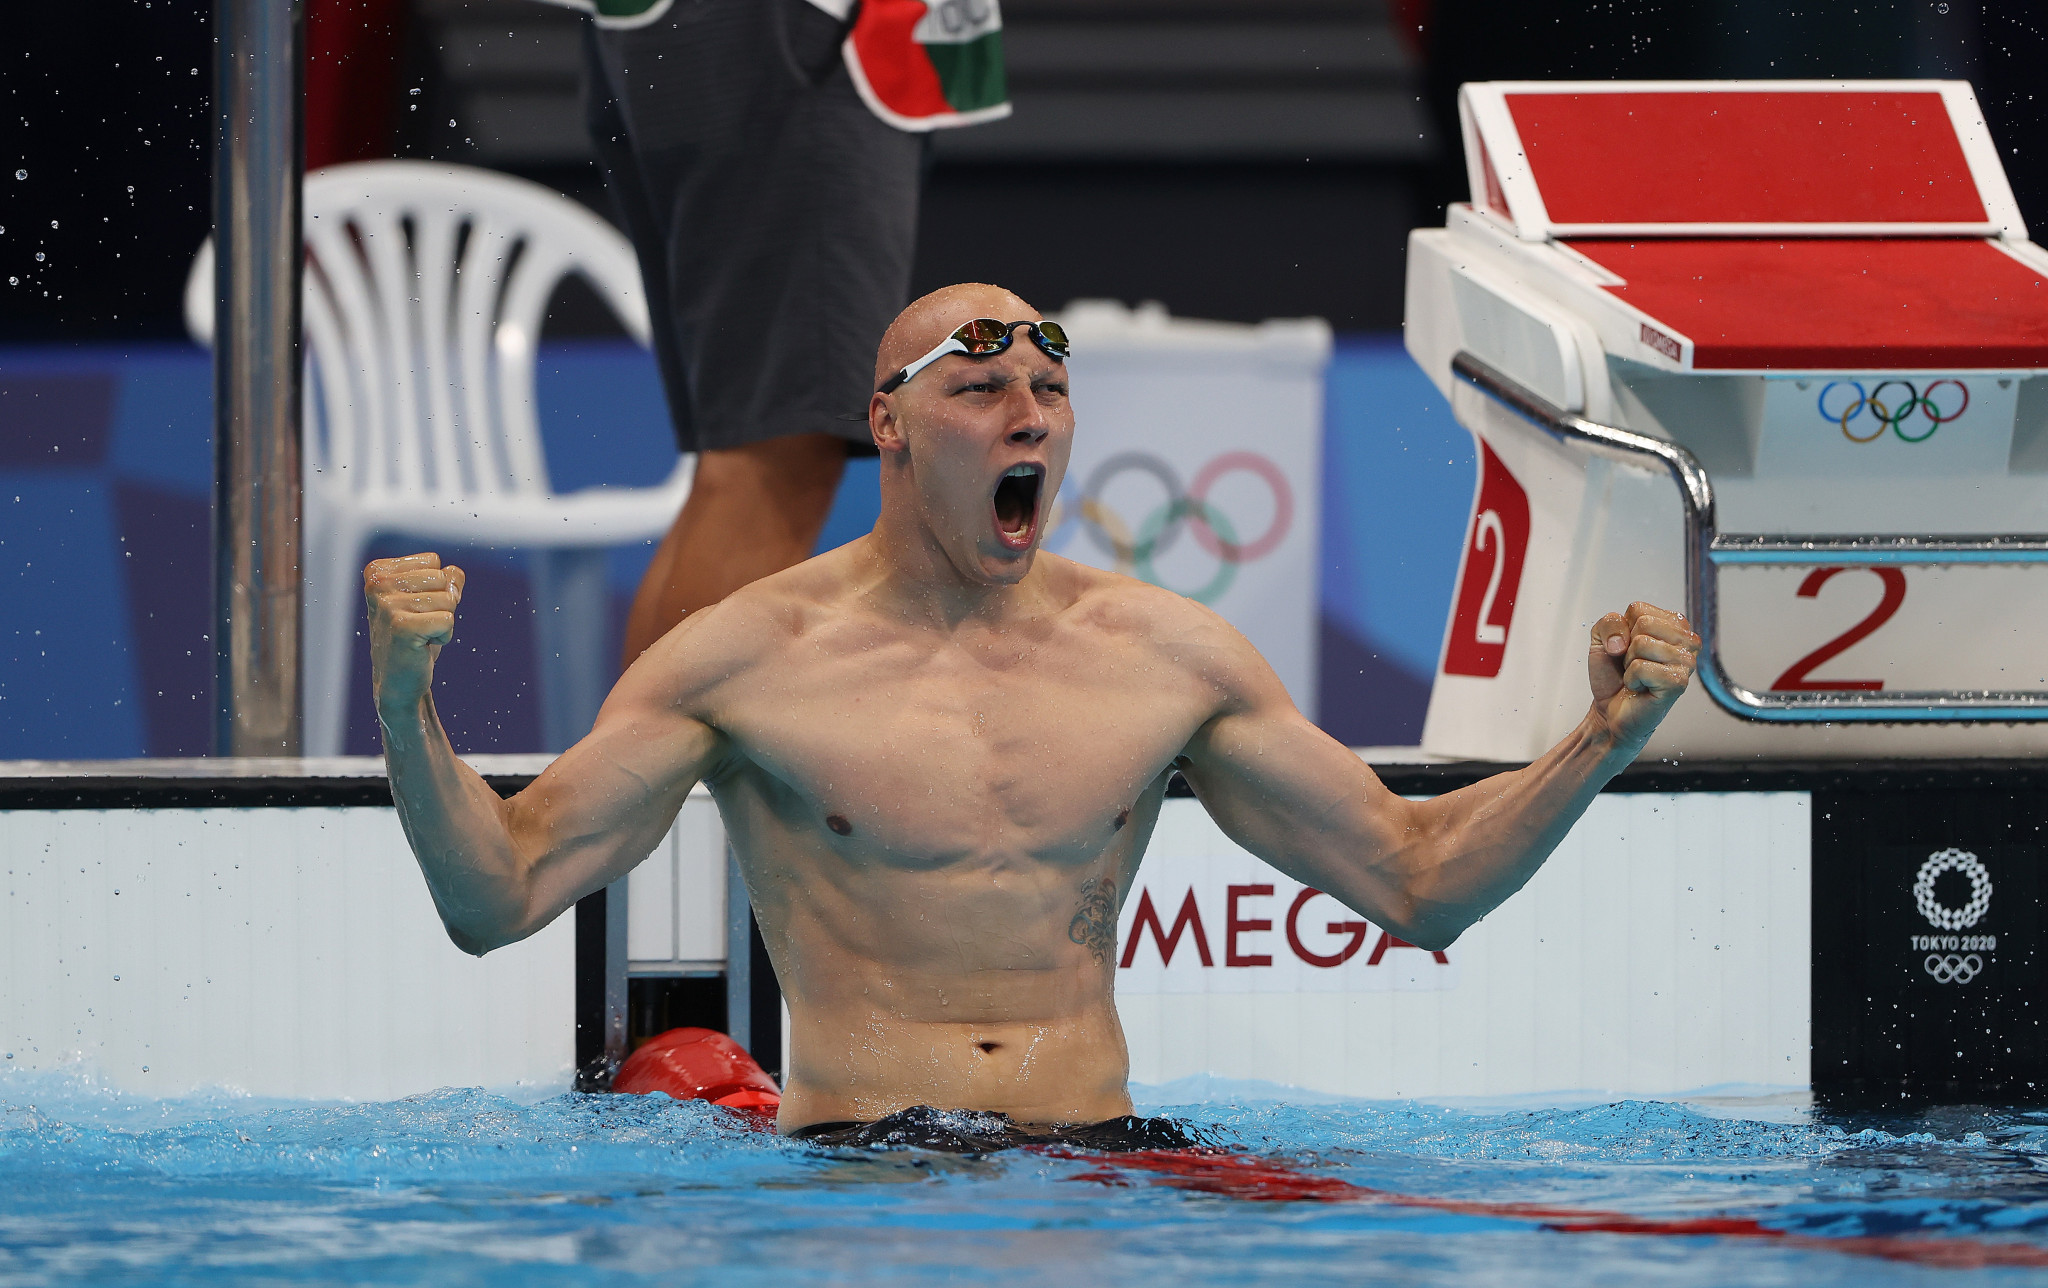 Swimmer Matti Mattsson celebrates after claiming bronze in the men's 200 metres breaststroke at the Tokyo 2020 Olympics ©Getty Images